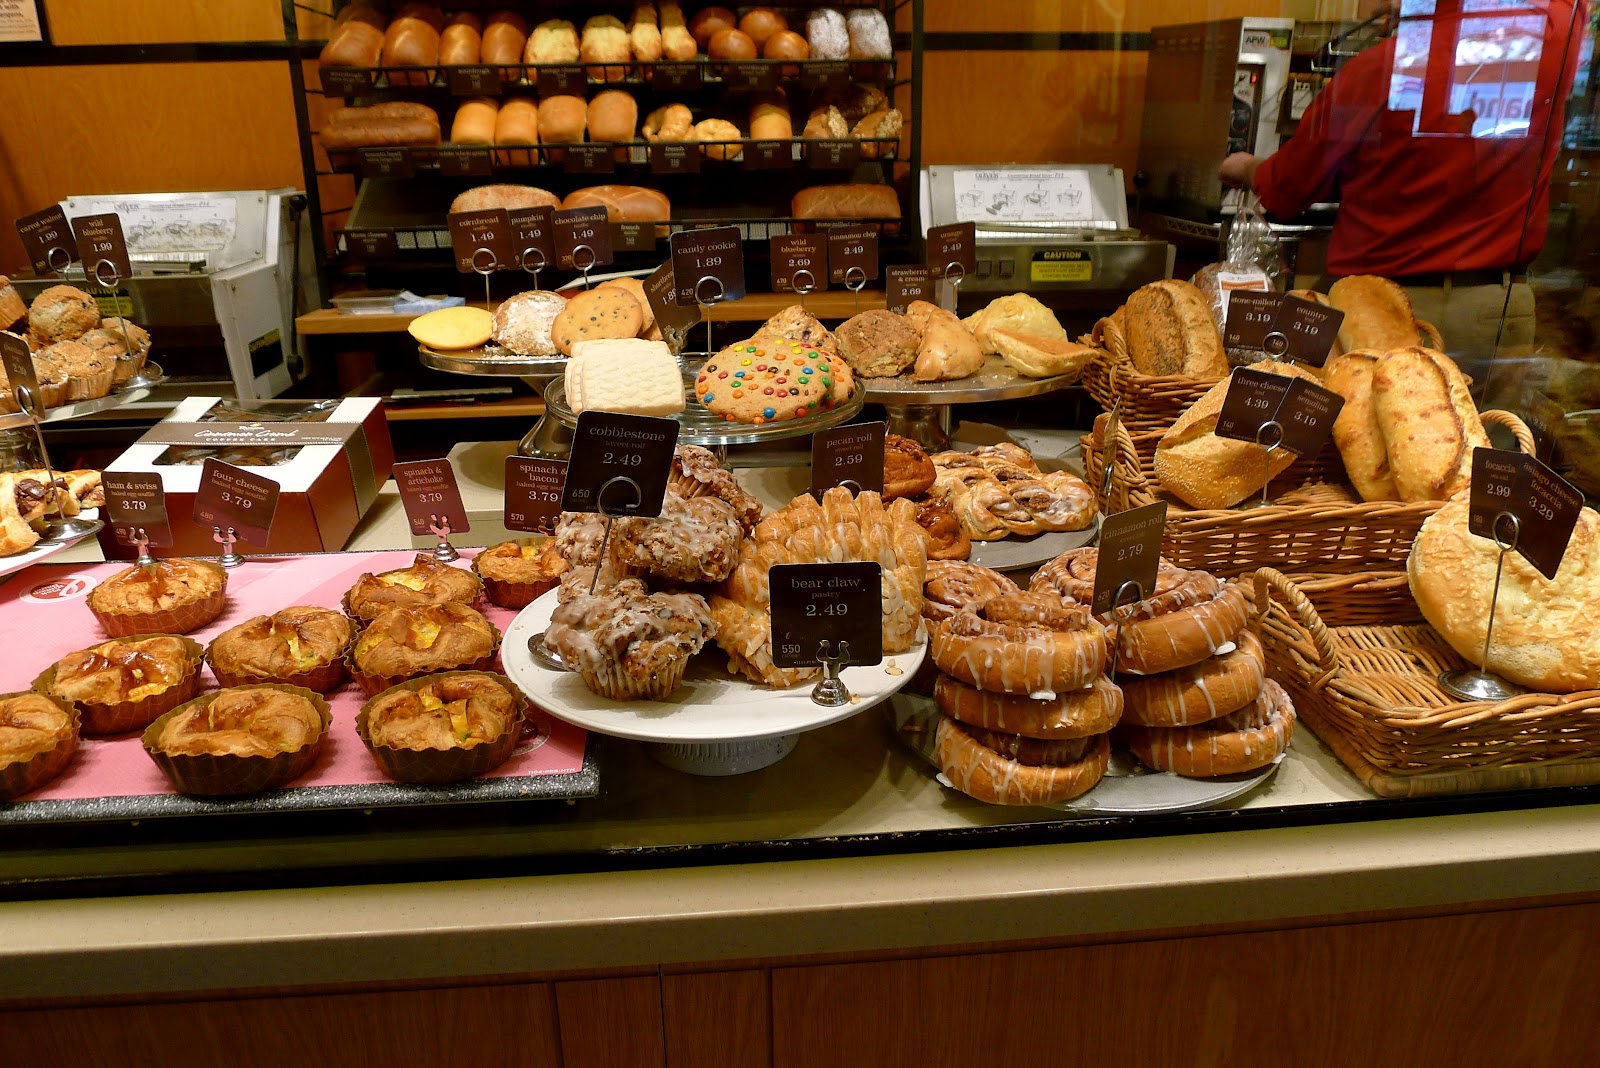 Bread And Pastries In Search For The Greatest Food Panera Bread.